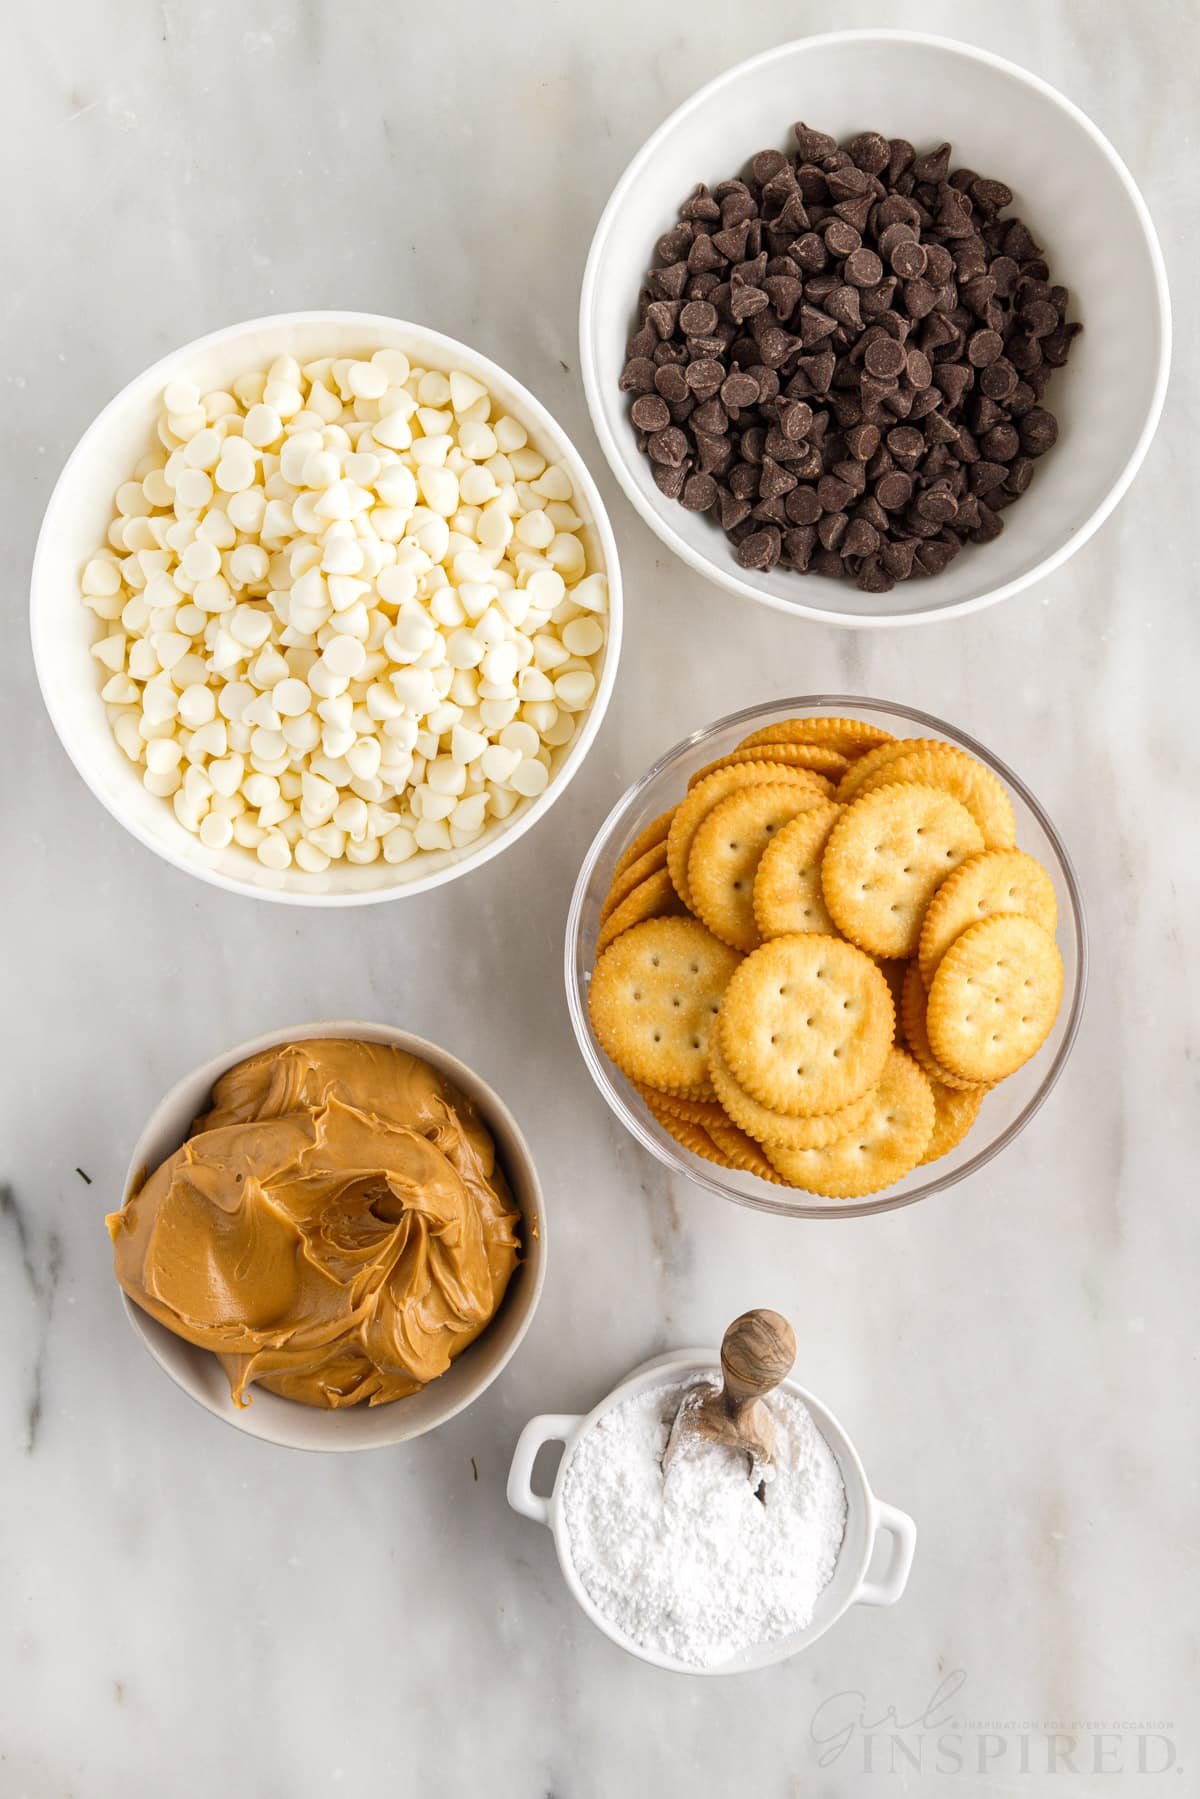 ingredients needed to make chocolate dipped peanut butter ritz cookies